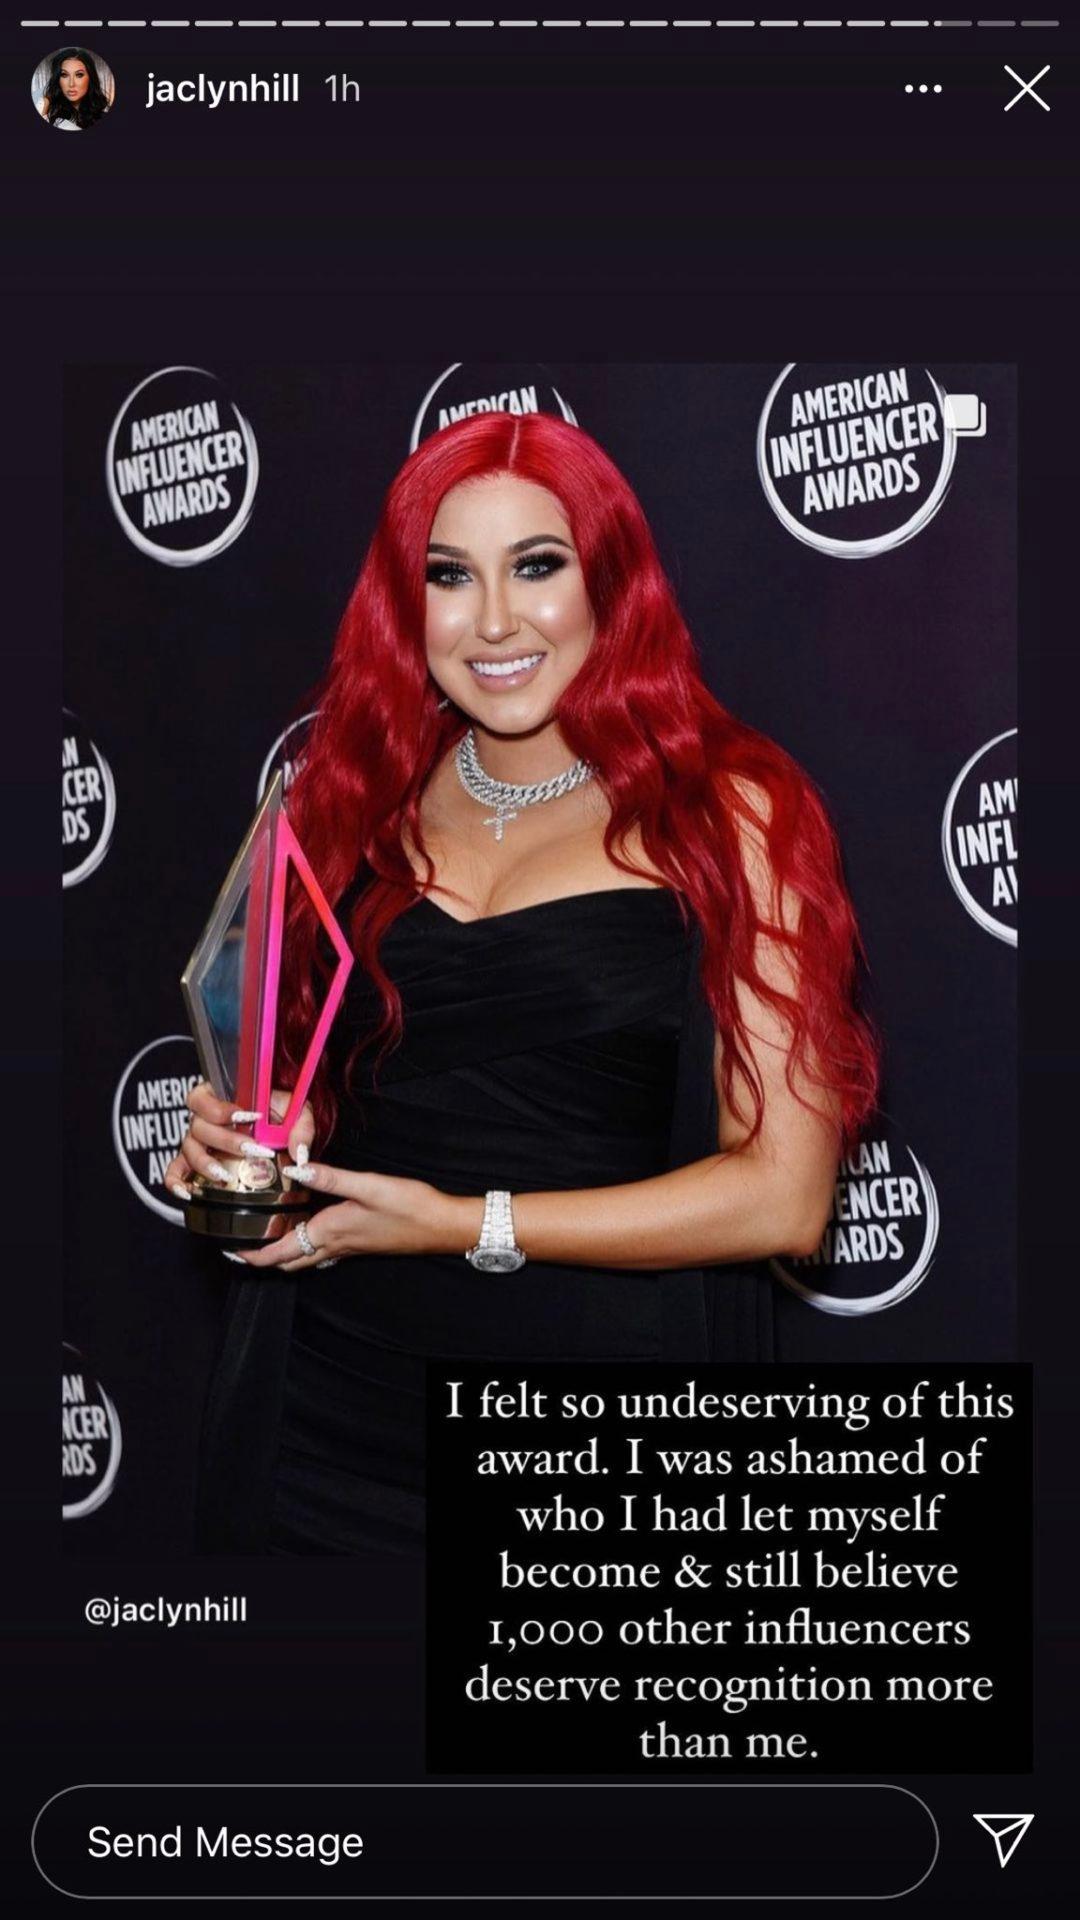 Jaclyn Hill poses with her trophy at the Influencer Awards.